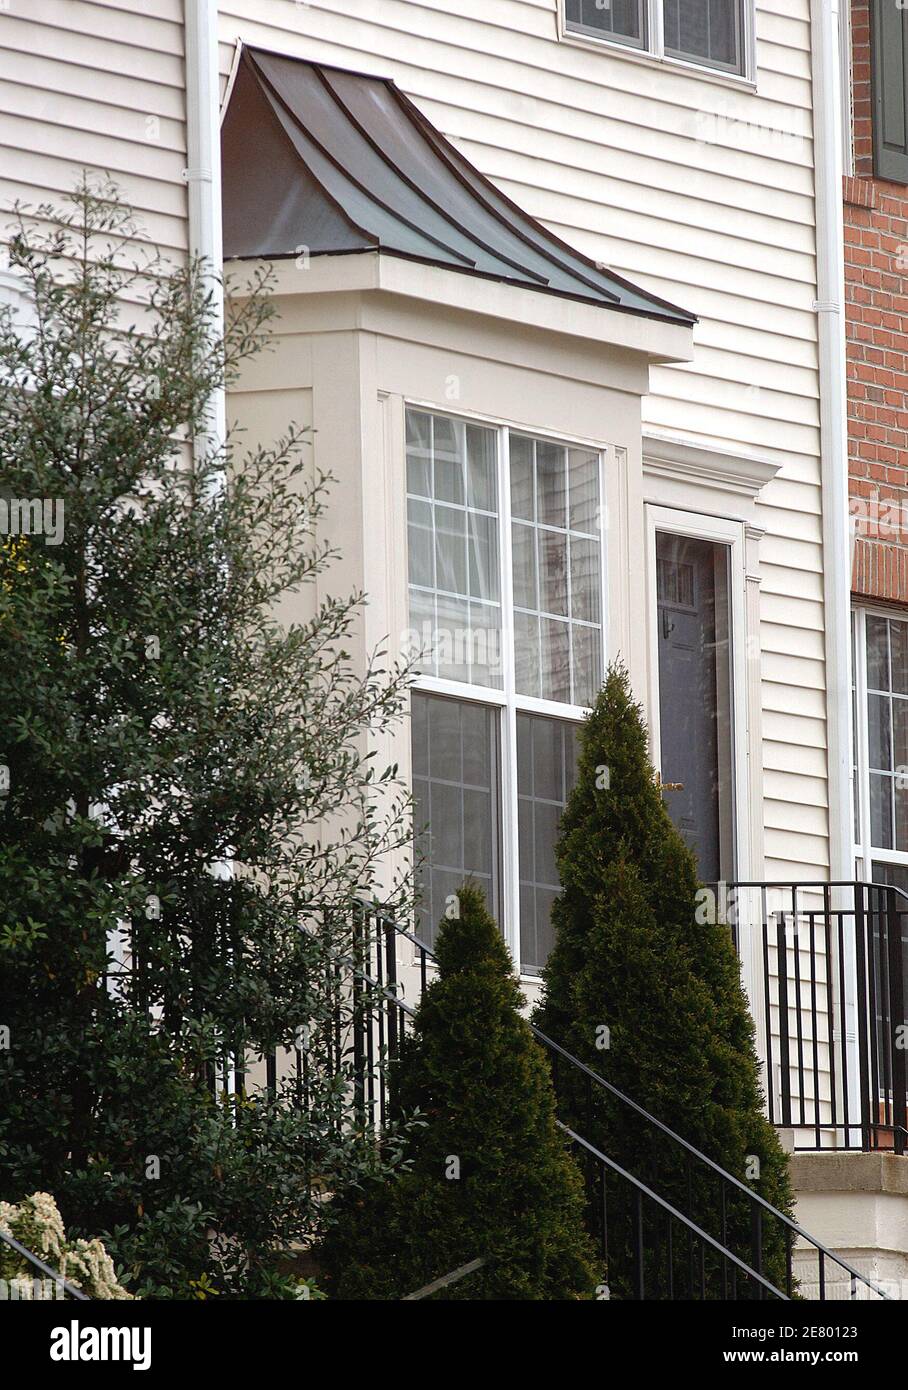 A view of the townhouse where Cho Seung-Hui lived in Centreville, VA, USA on April 18, 2007. Officials have named Seung-Hui, the 23-year-old South Korean native, as the suspect in the killing rampage at Virginia Tech yesterday killing 32 and self. Photo by Olivier Douliery/ABACAPRESS.COM Stock Photo